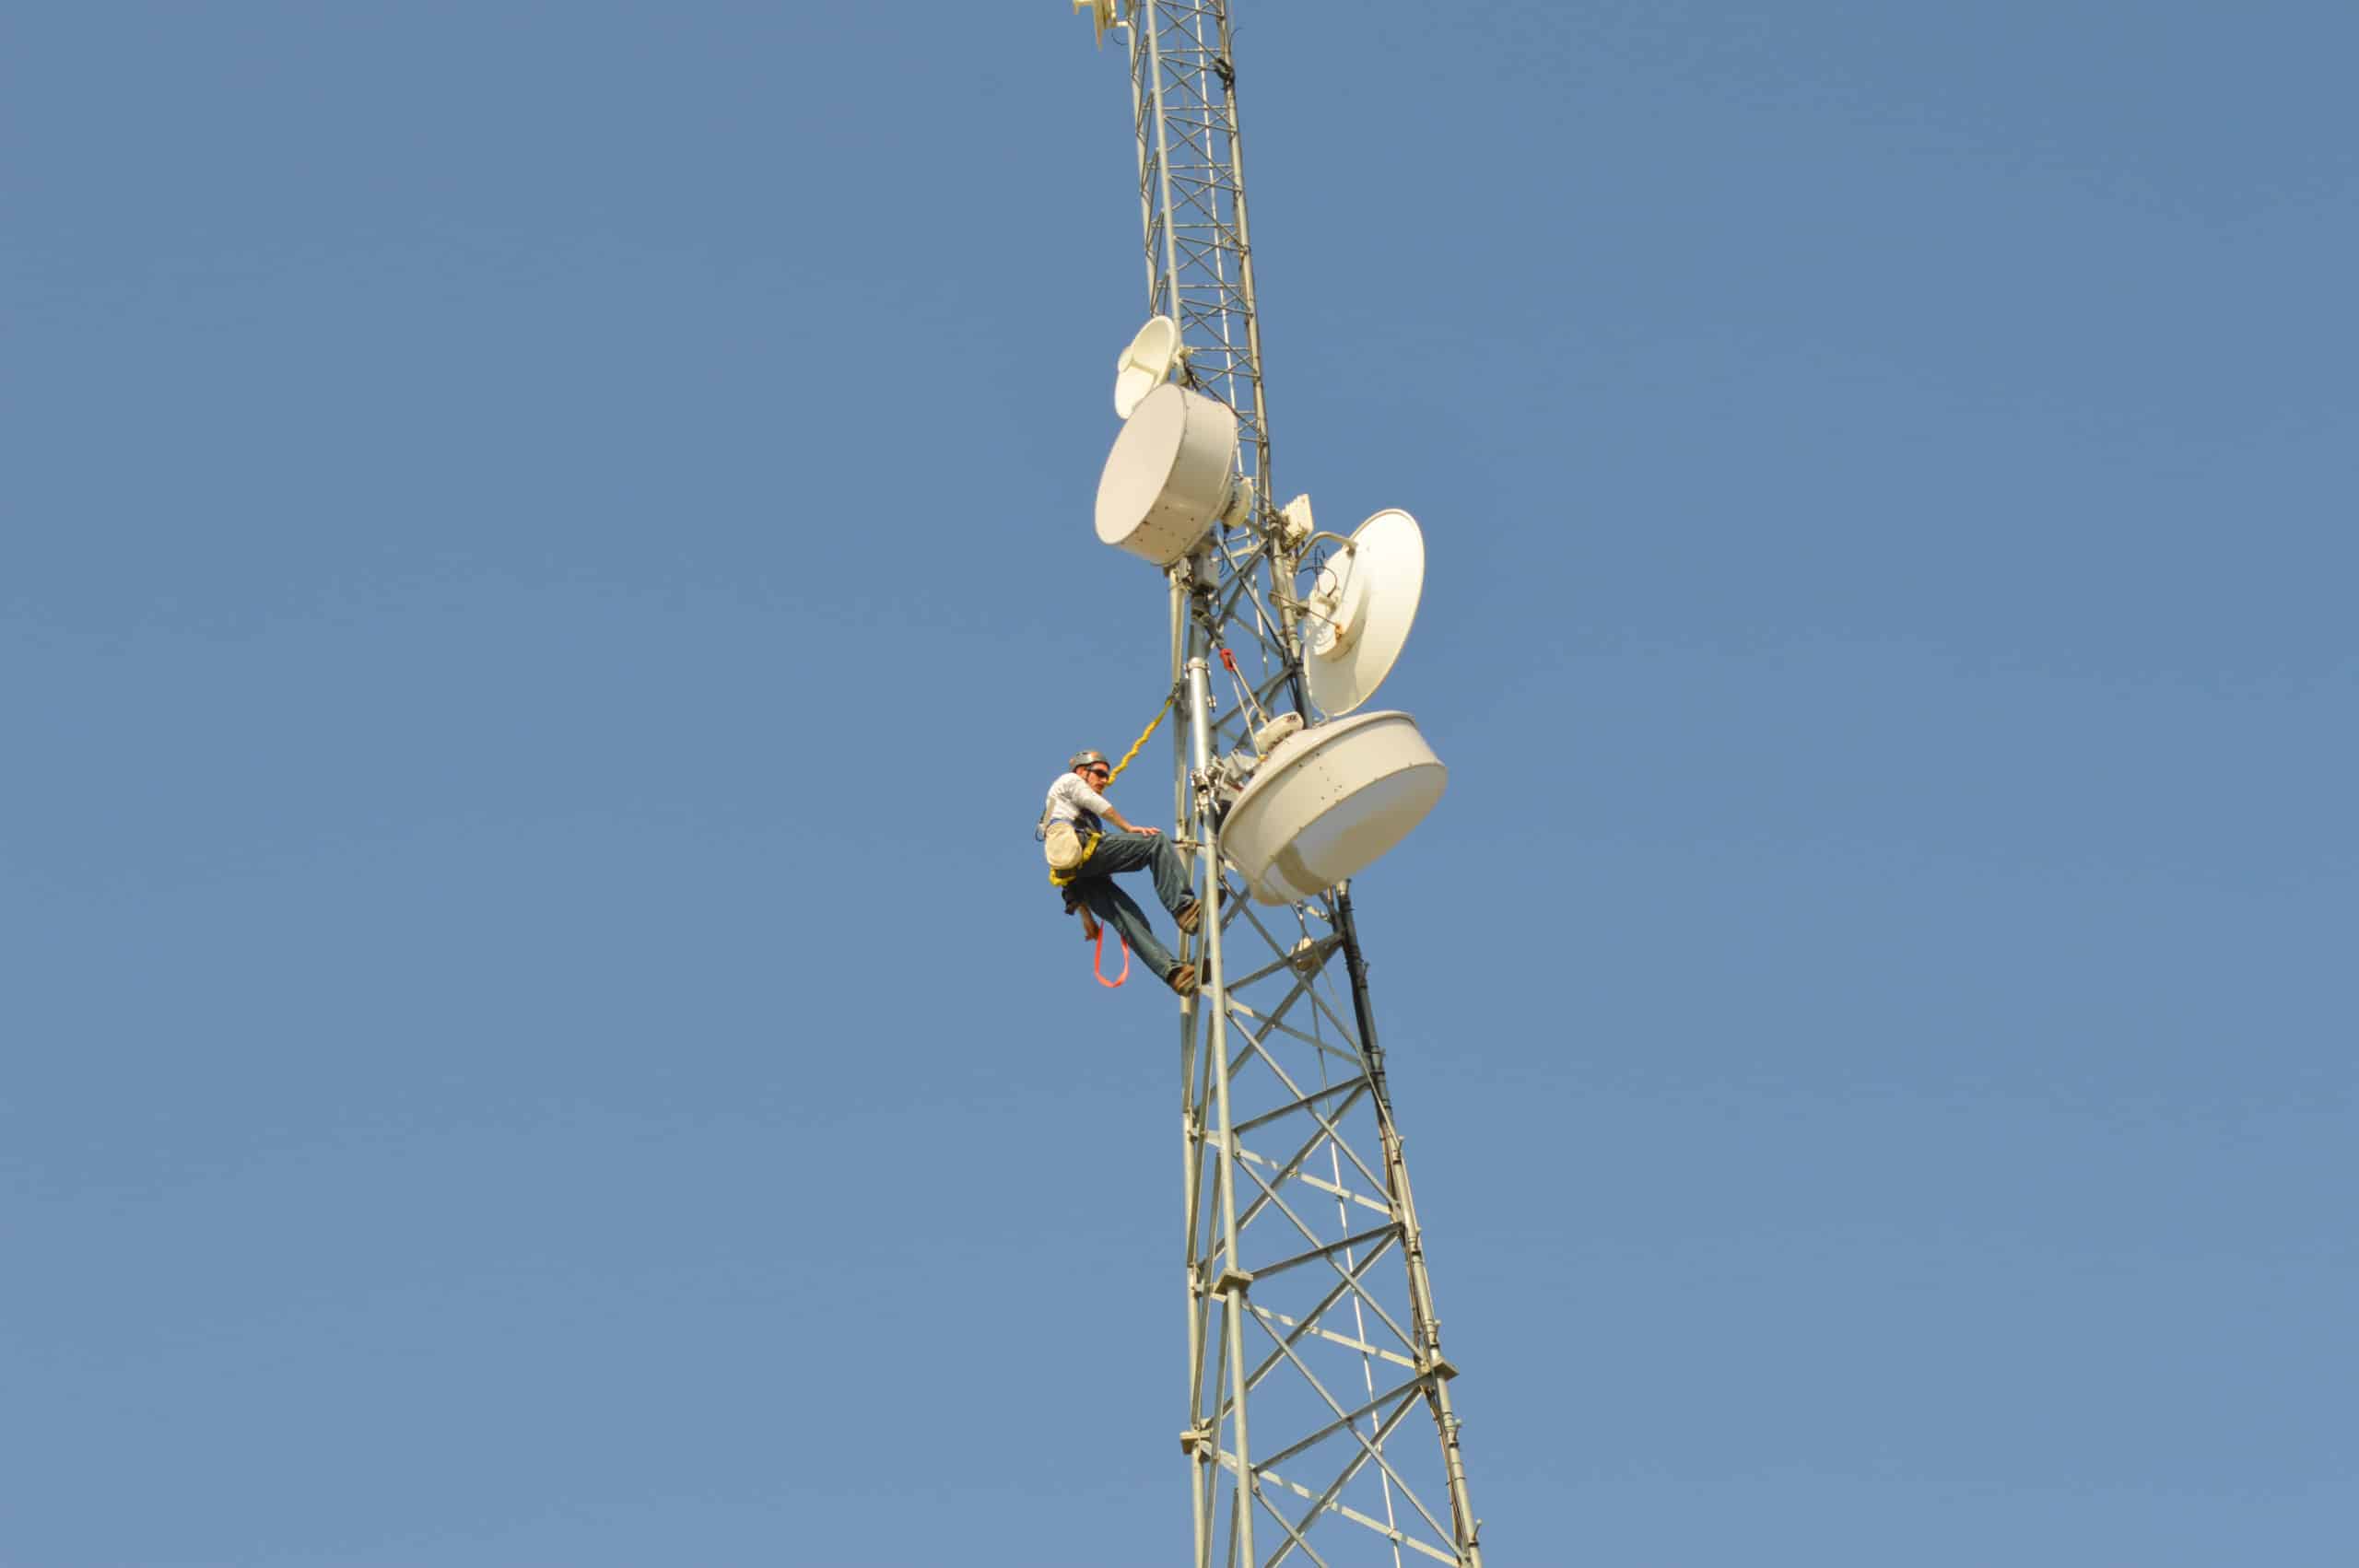 Read more about the article unWired increases Internet capacity in Laton, CA with new tower